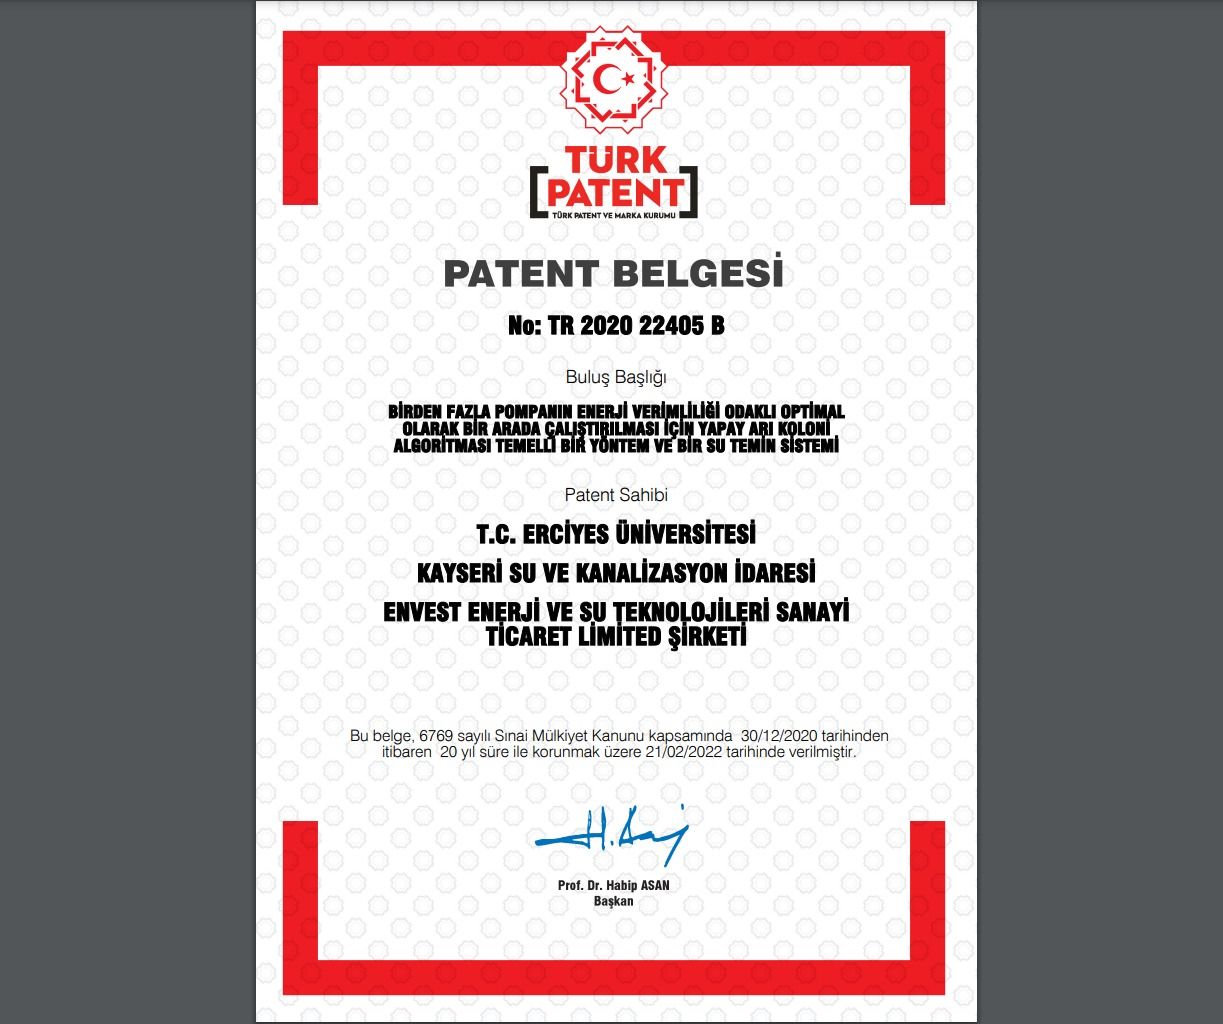 Our patent has been published!